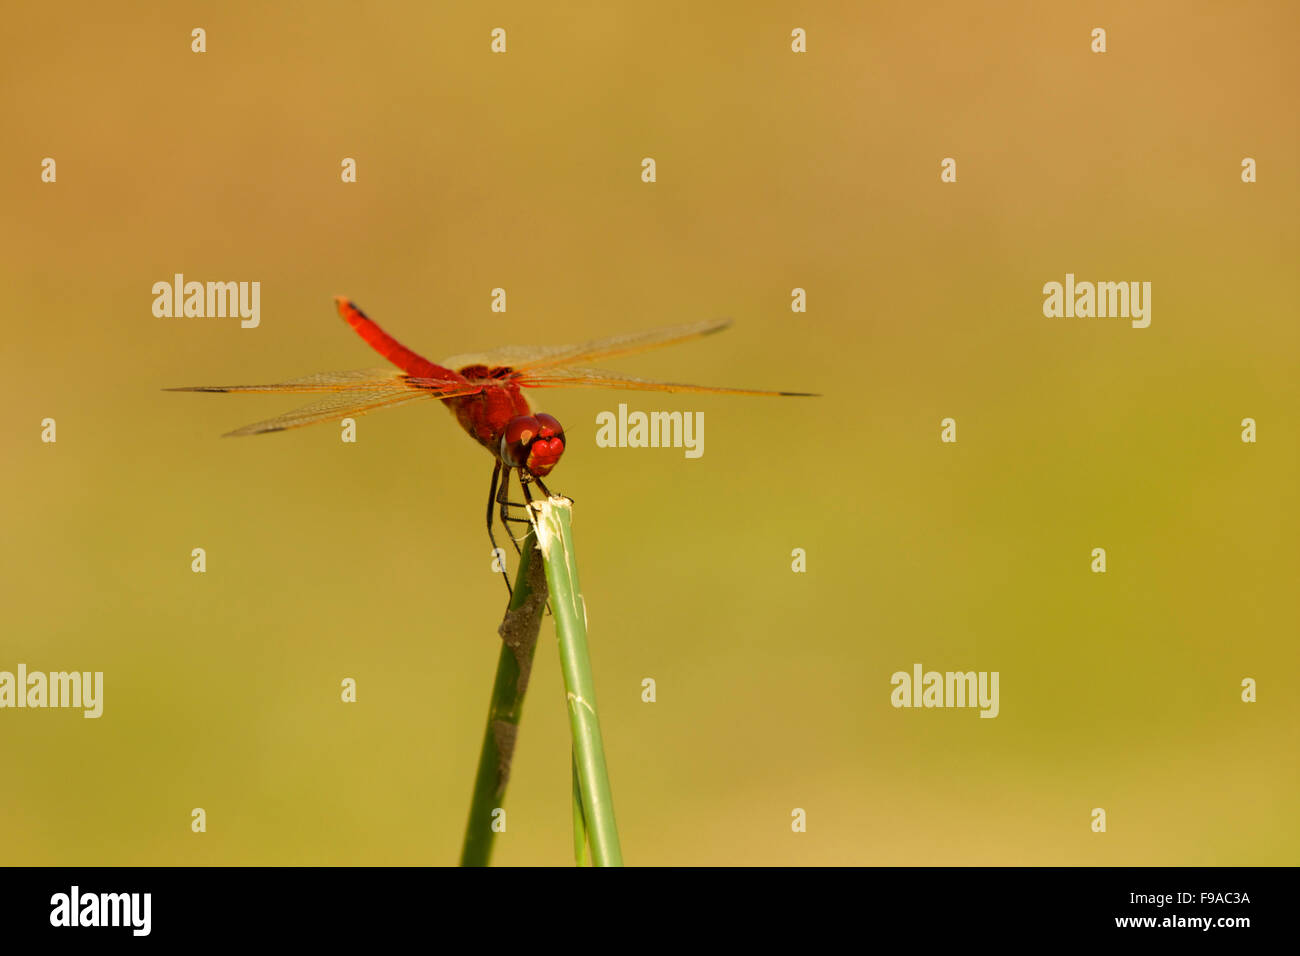 Close-up of a dragonfly on a reed stem, Mana Pool, Zimbabwe Stock Photo